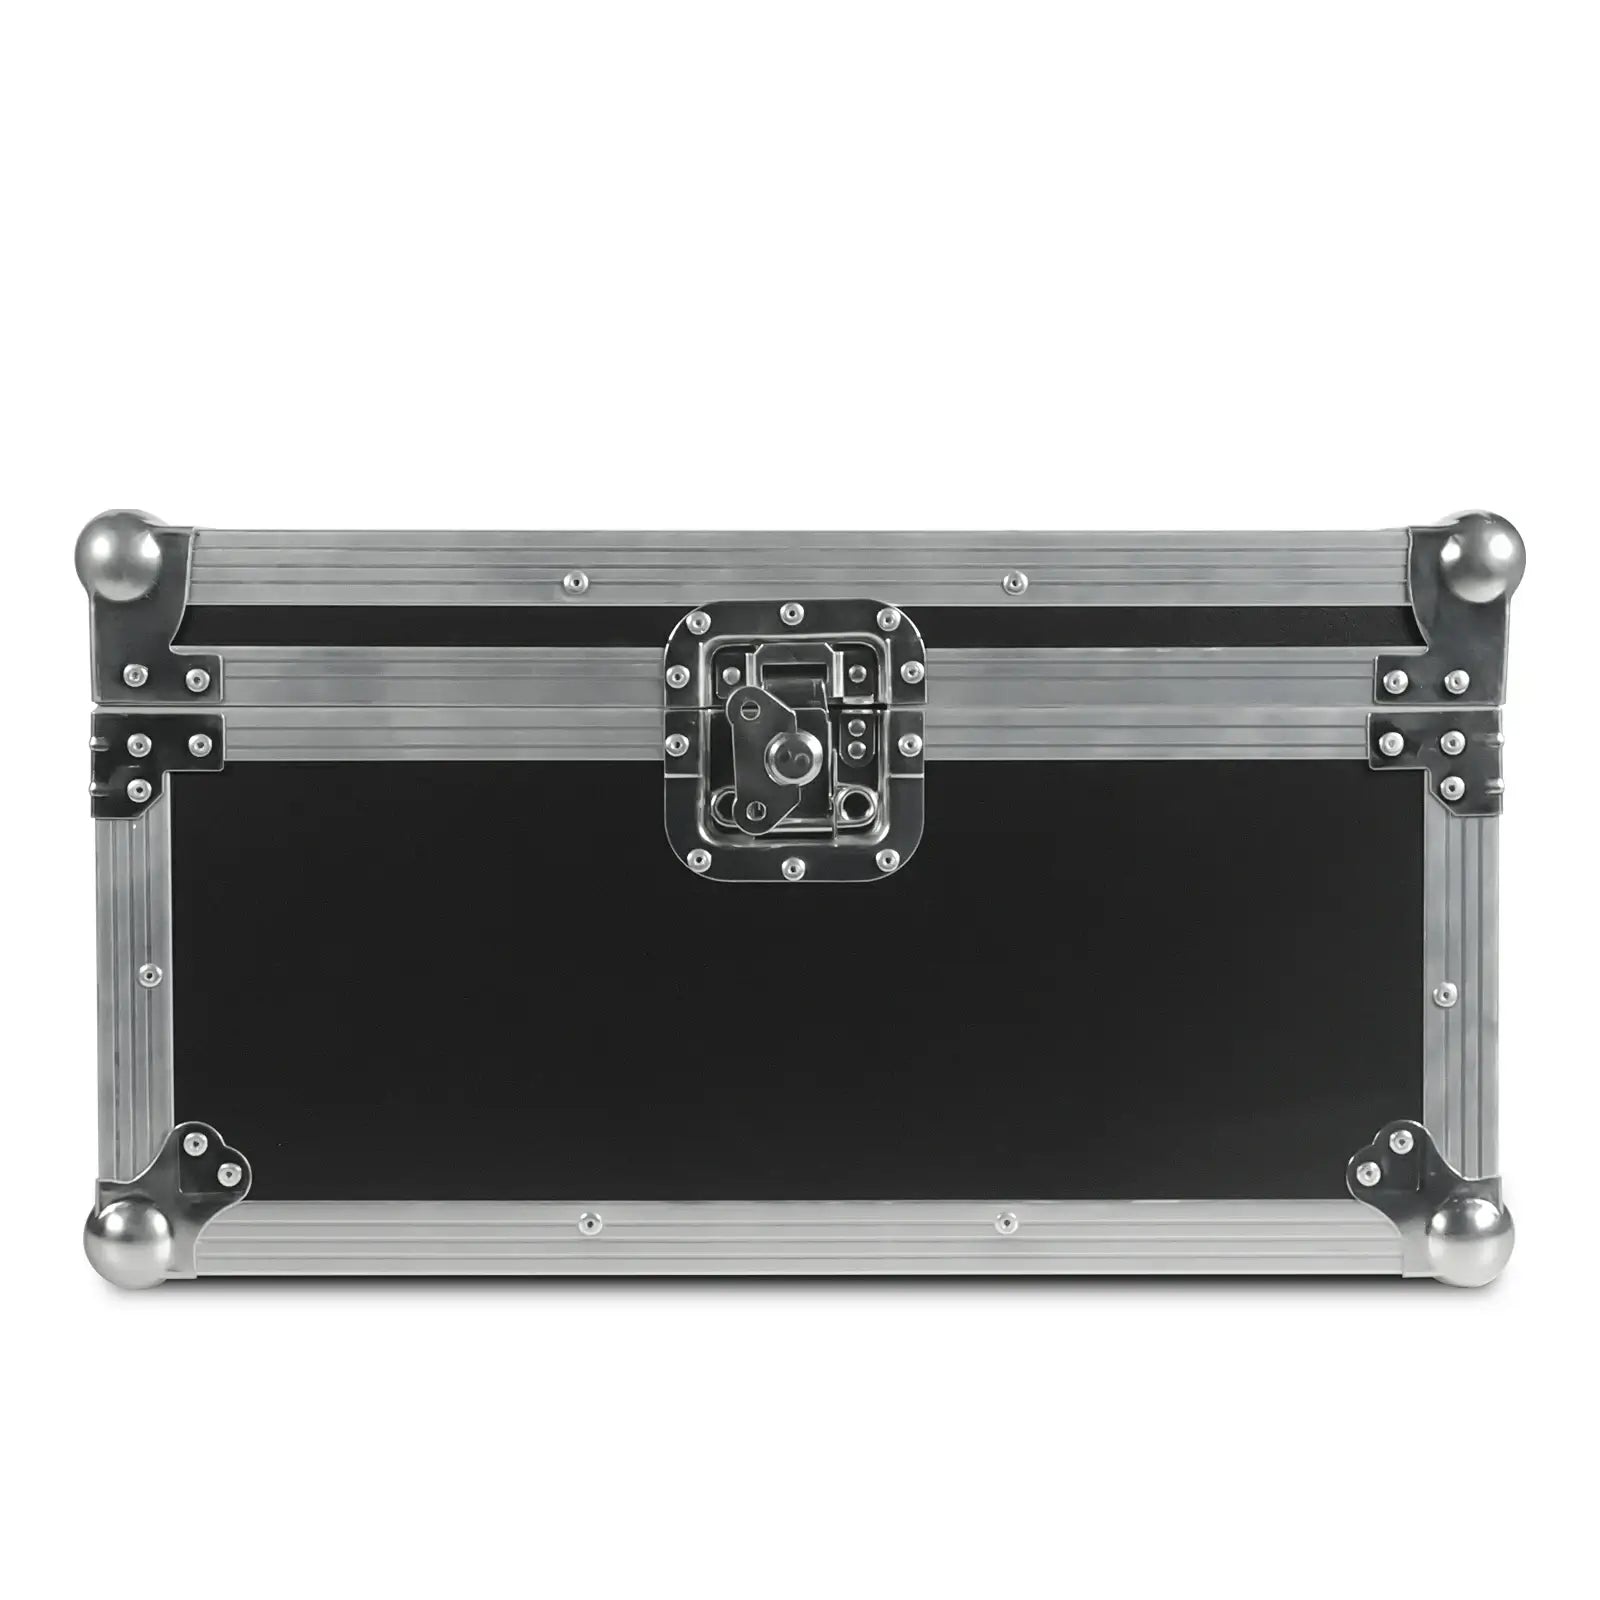 Flight Cases for （2）ZQ16001/ZQ16003 Cold Spark Machines